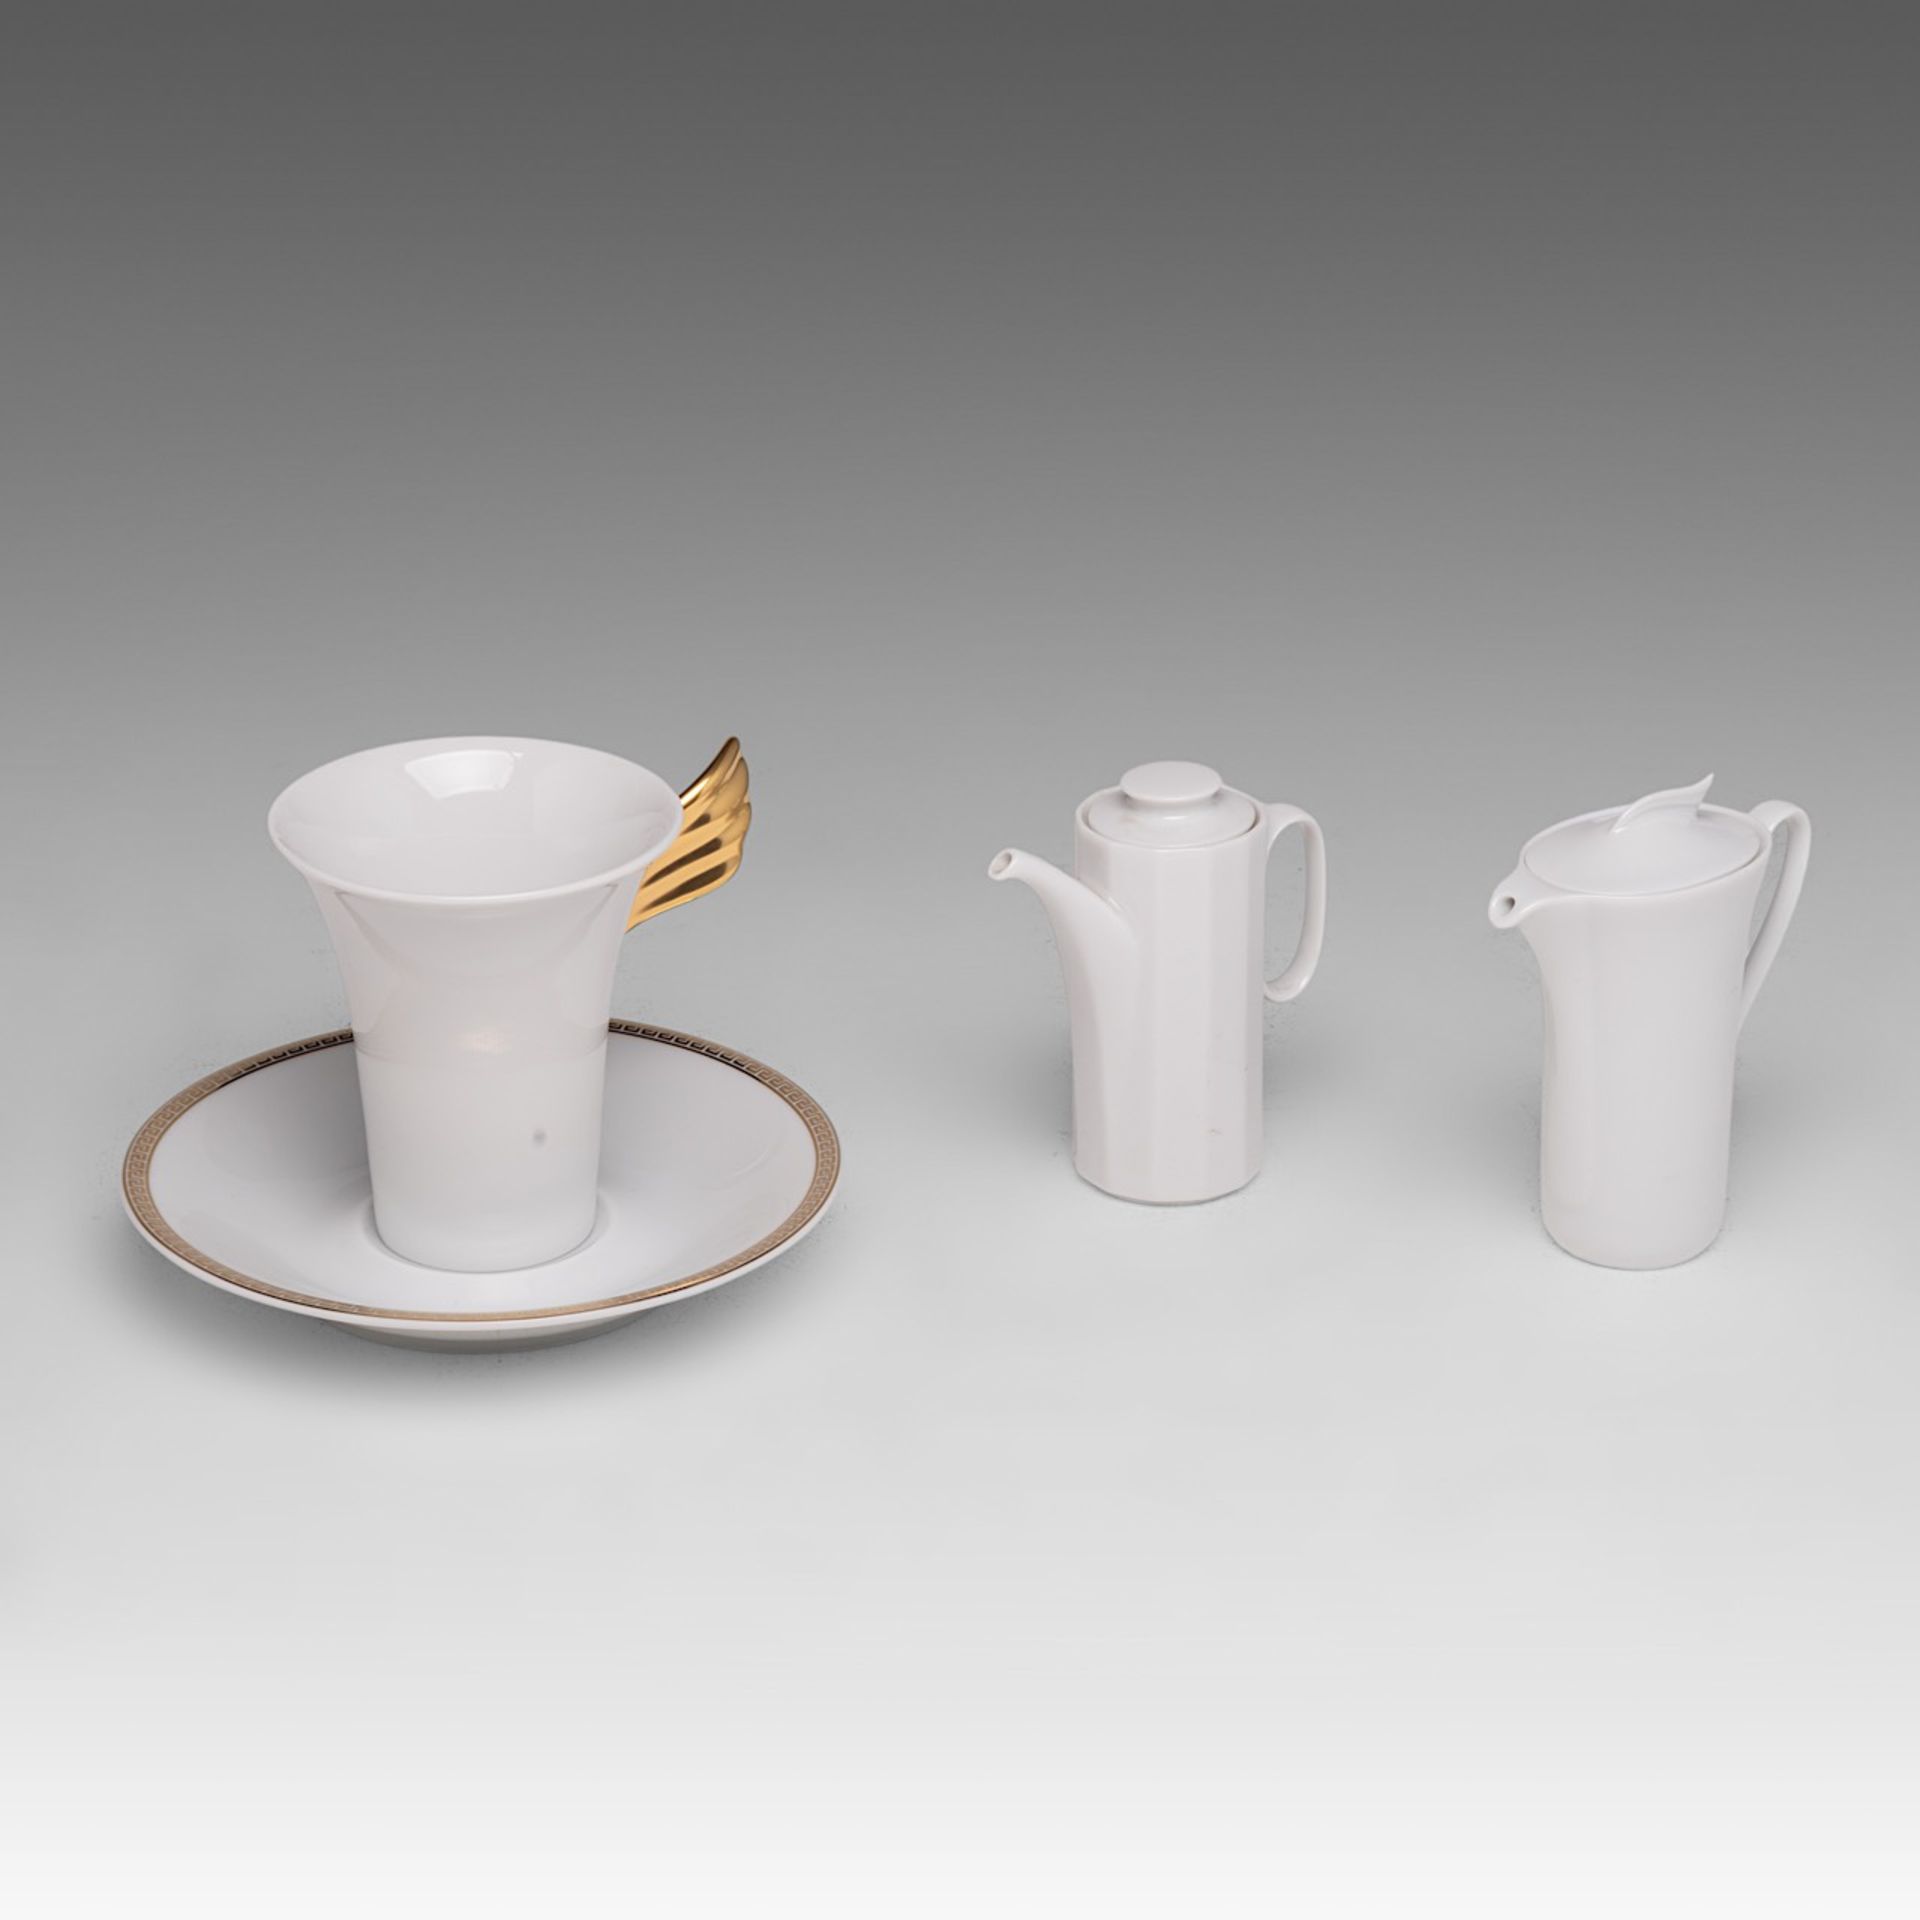 A 68-piece set of Versace 'Ikarus medaillon meandre d'or', porcelain tableware for Rosenthal, added - Image 9 of 11